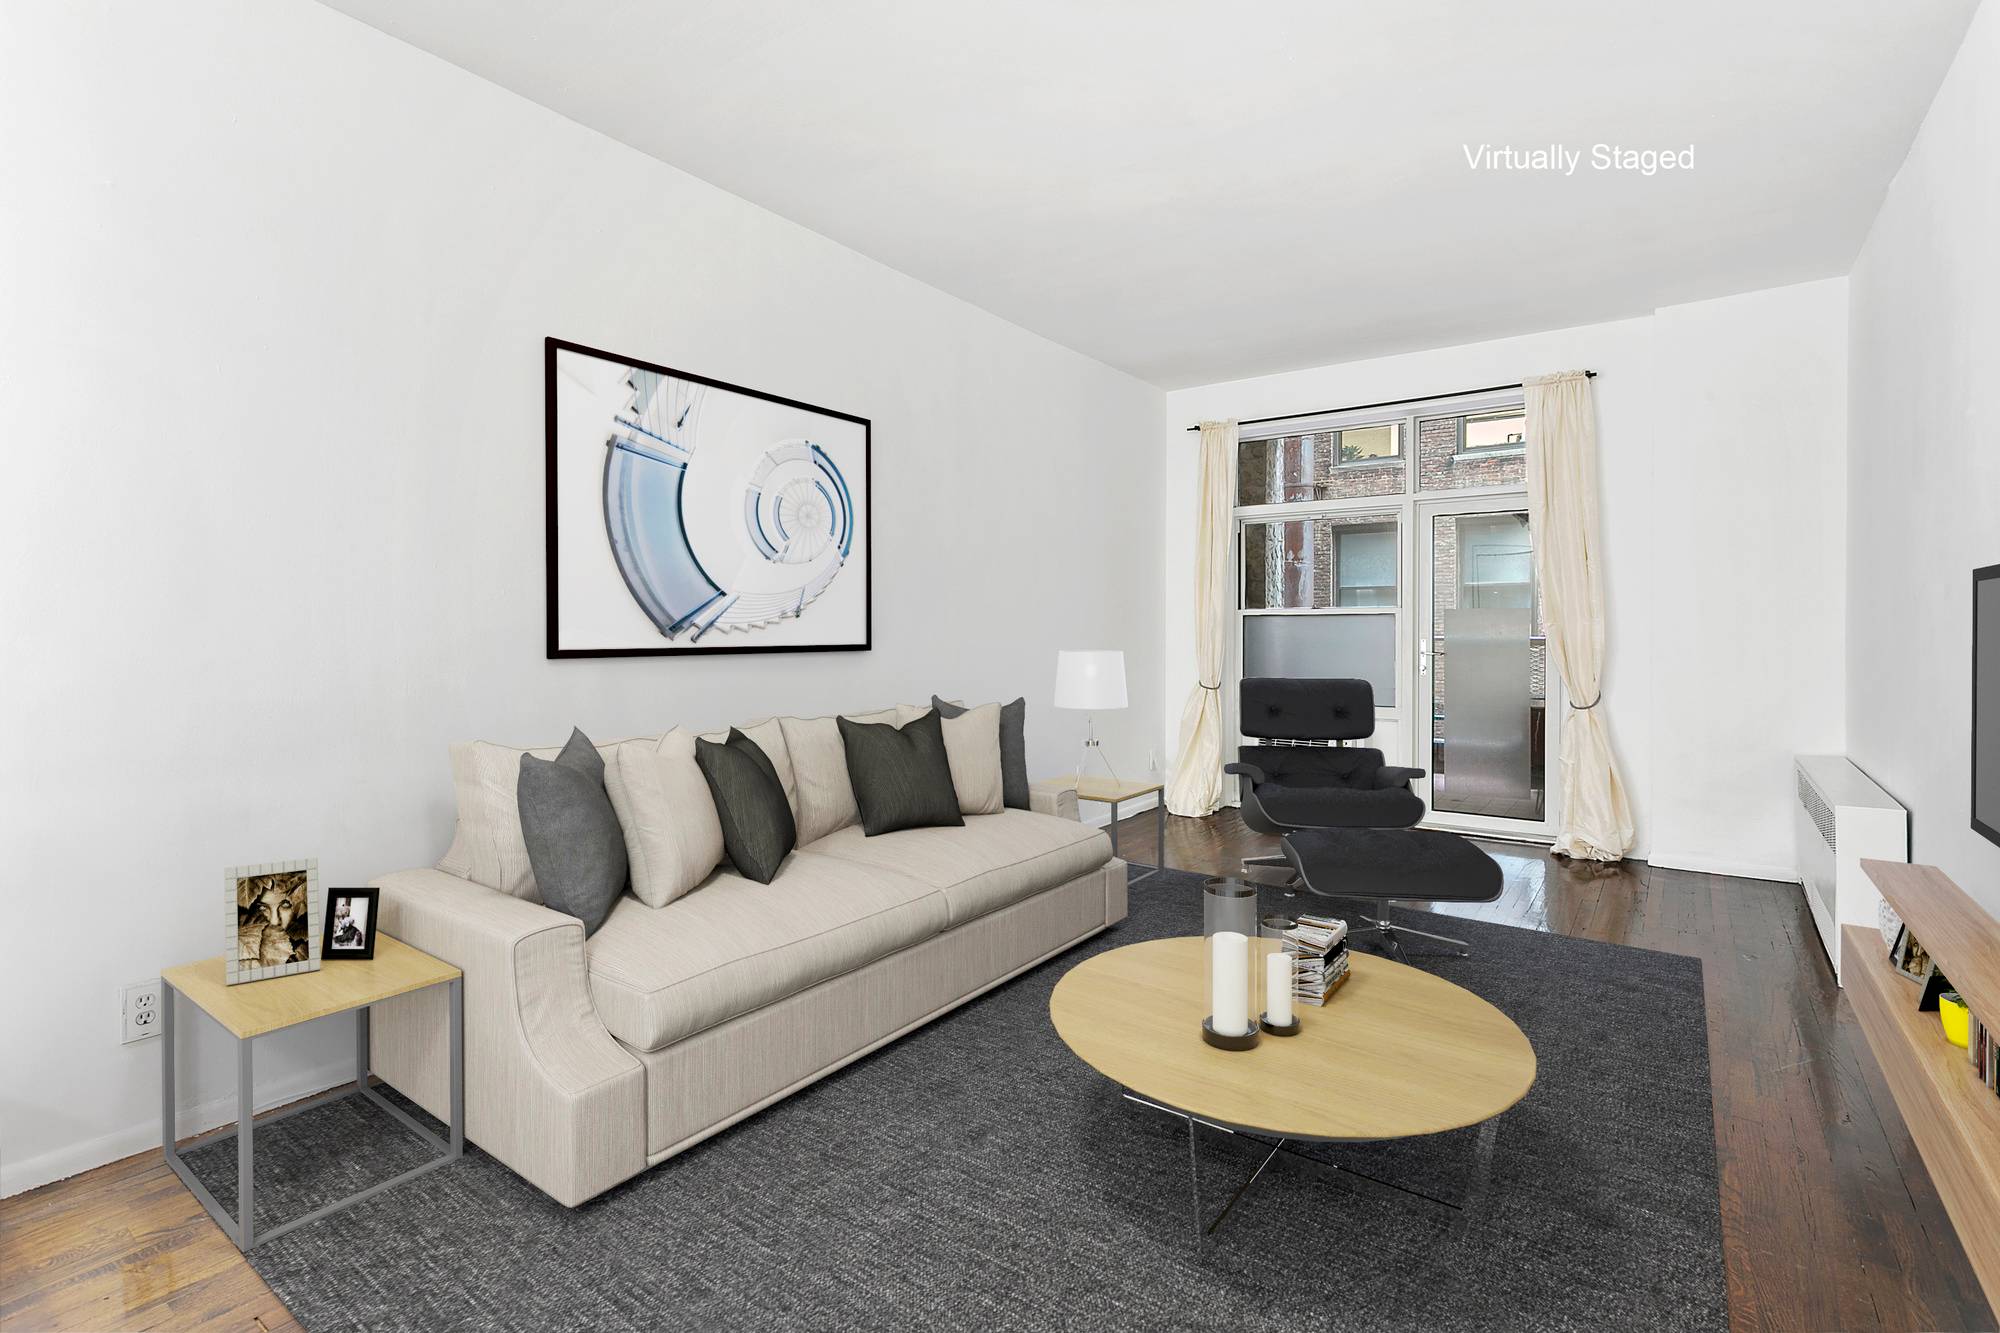 NEW PRICE Extra large Alcove Studio at Murray Hill Plaza, NoMads favored prewar coop at 159 Madison Avenue.